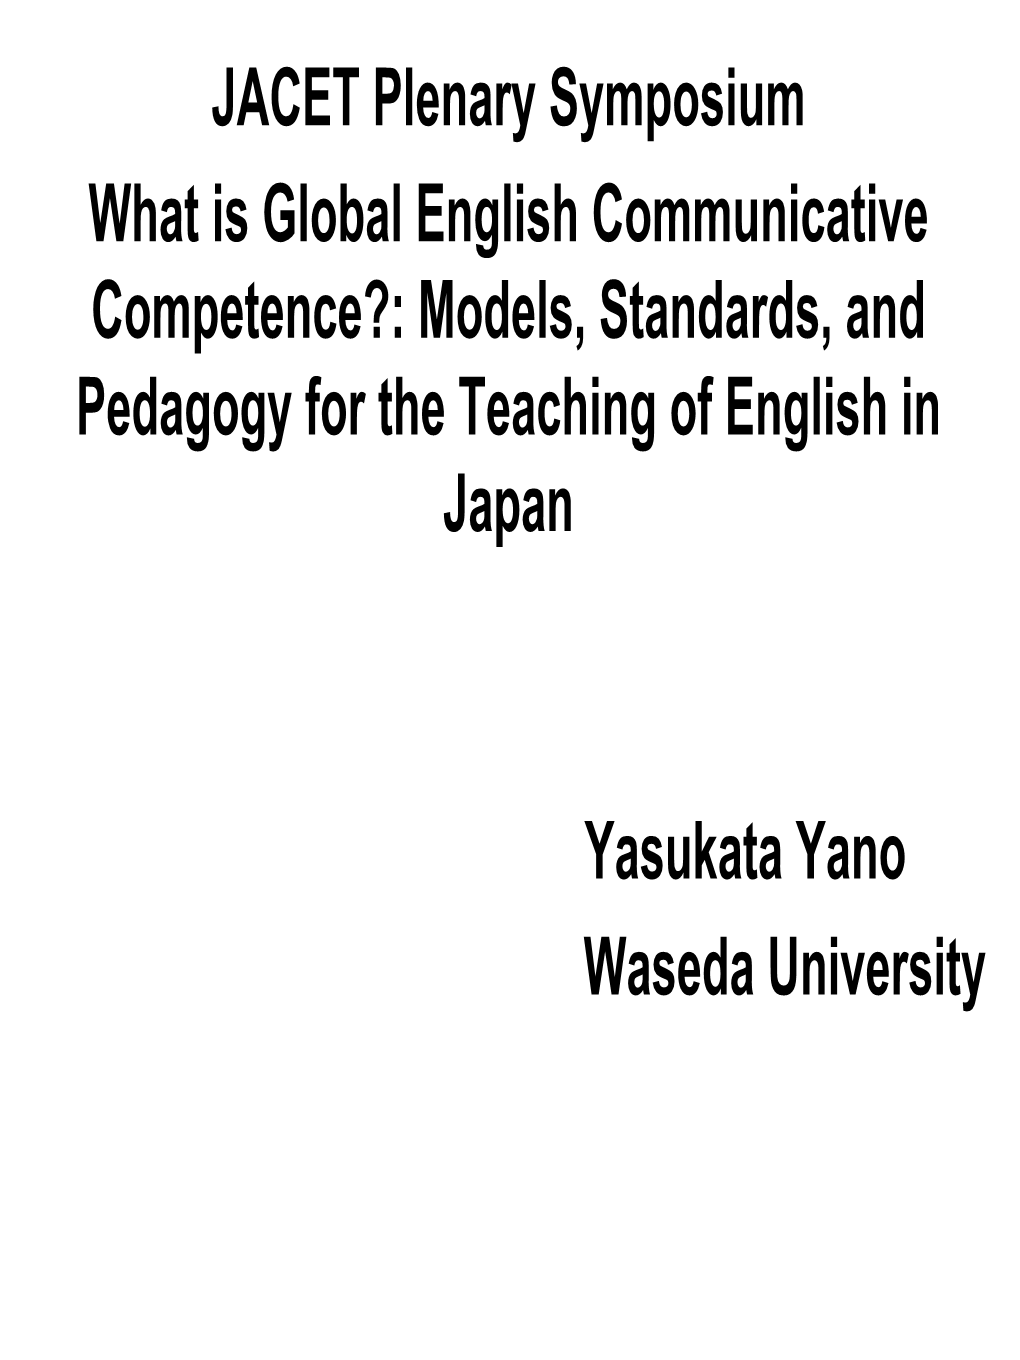 What Is Global English Communicative Competence?: Models, Standards, and Pedagogy for the Teaching of English in Japan